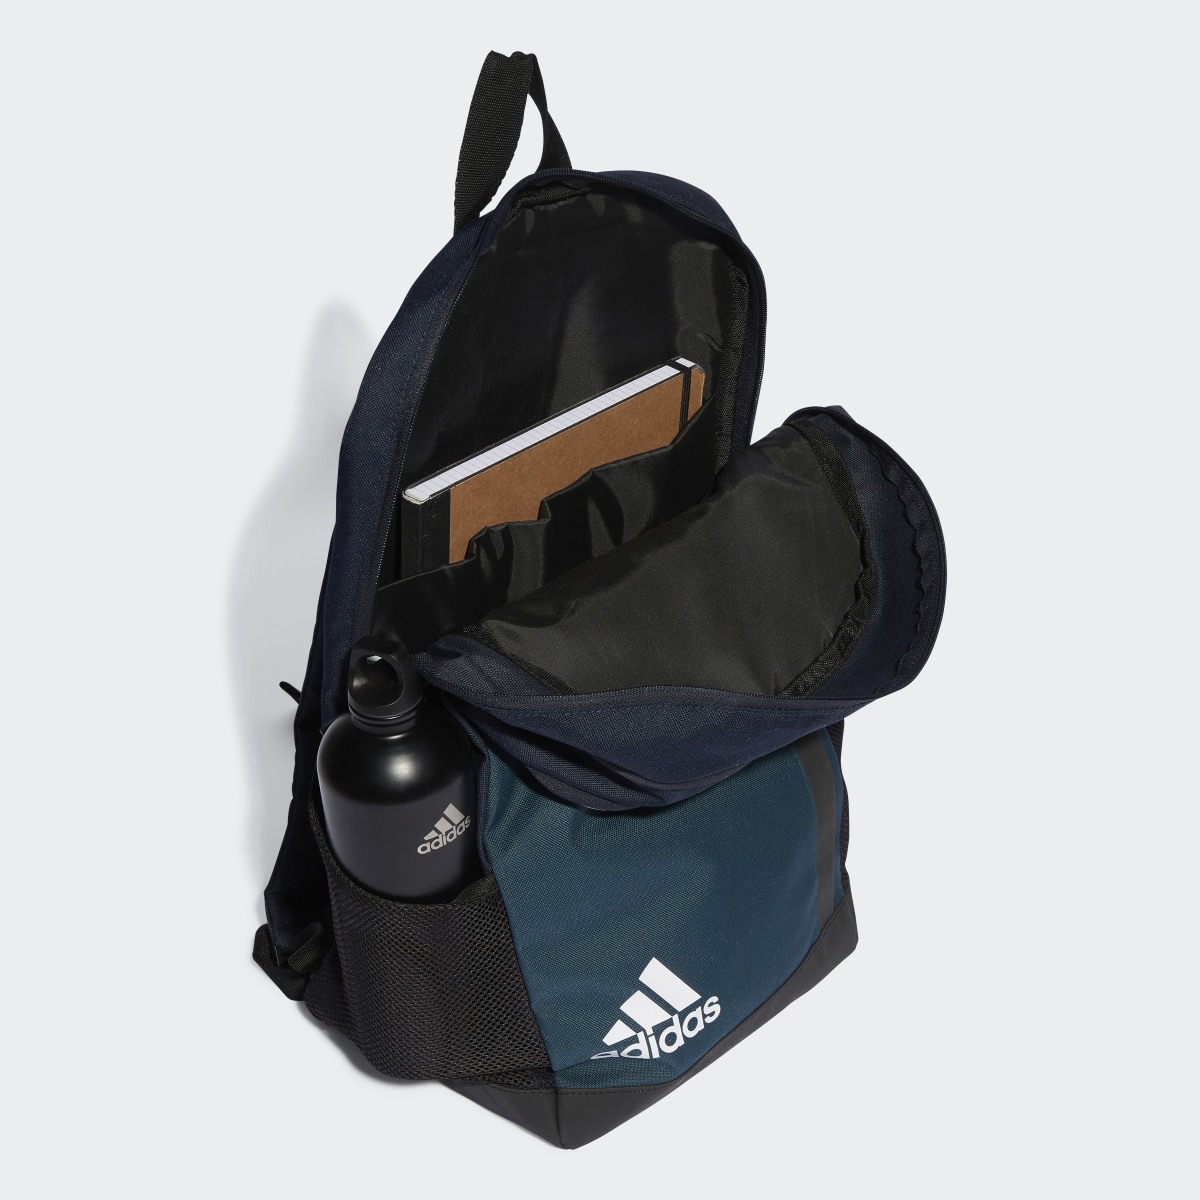 Adidas Motion Badge of Sport Backpack. 5